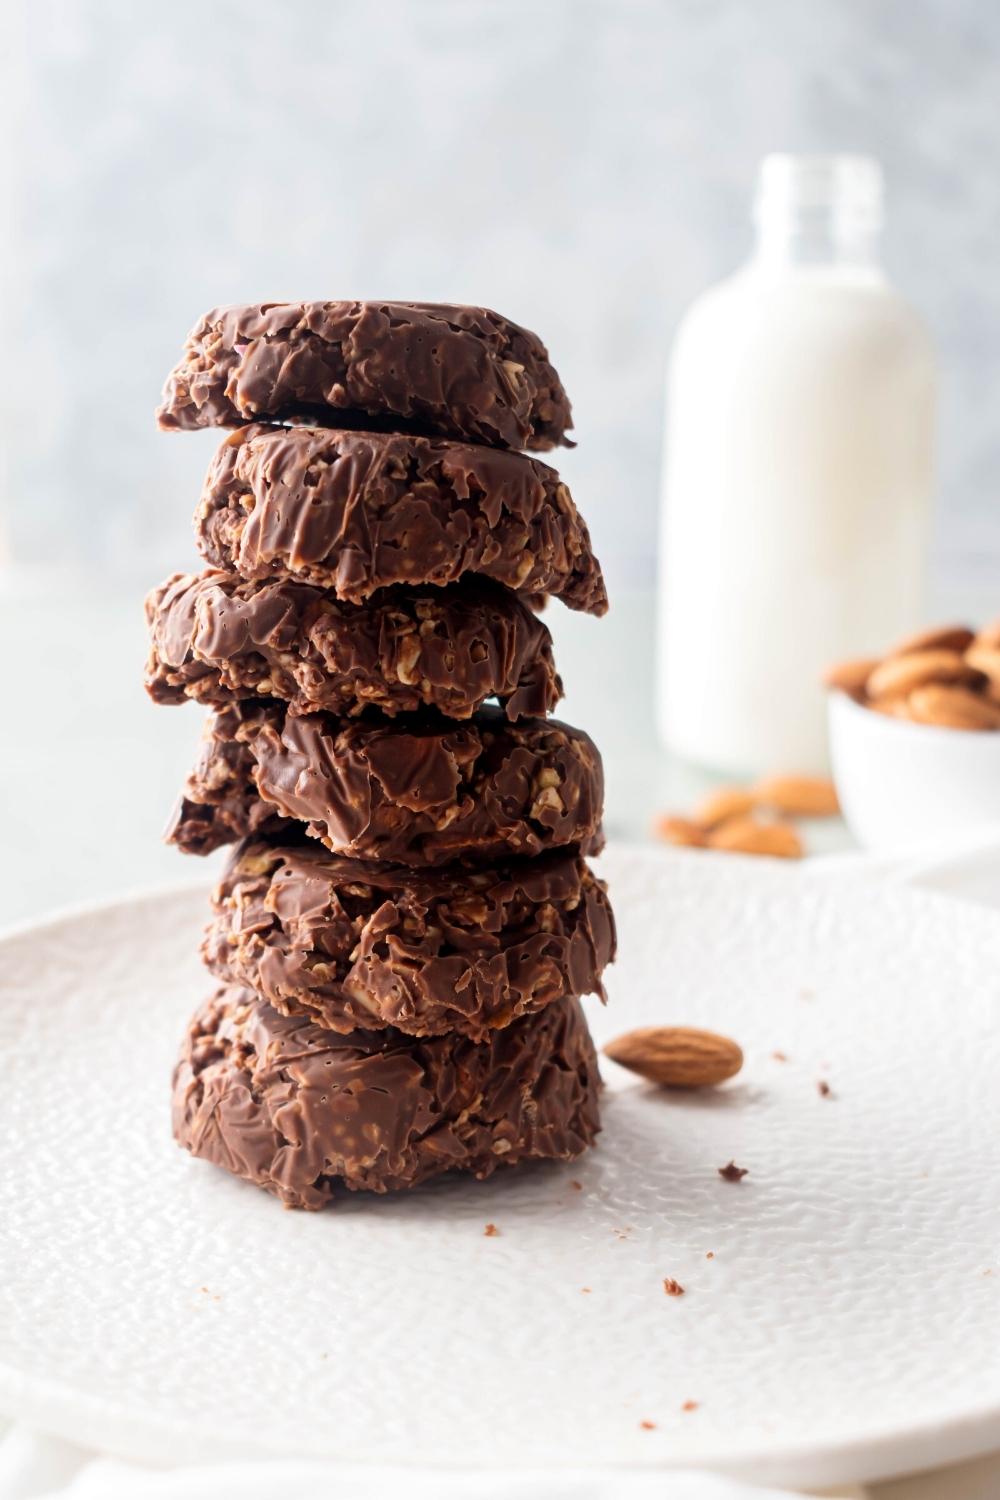 Six no bake chocolate oatmeal cookies stacked on top of one another on a white plate. There is a glass jar filled with milk behind them.